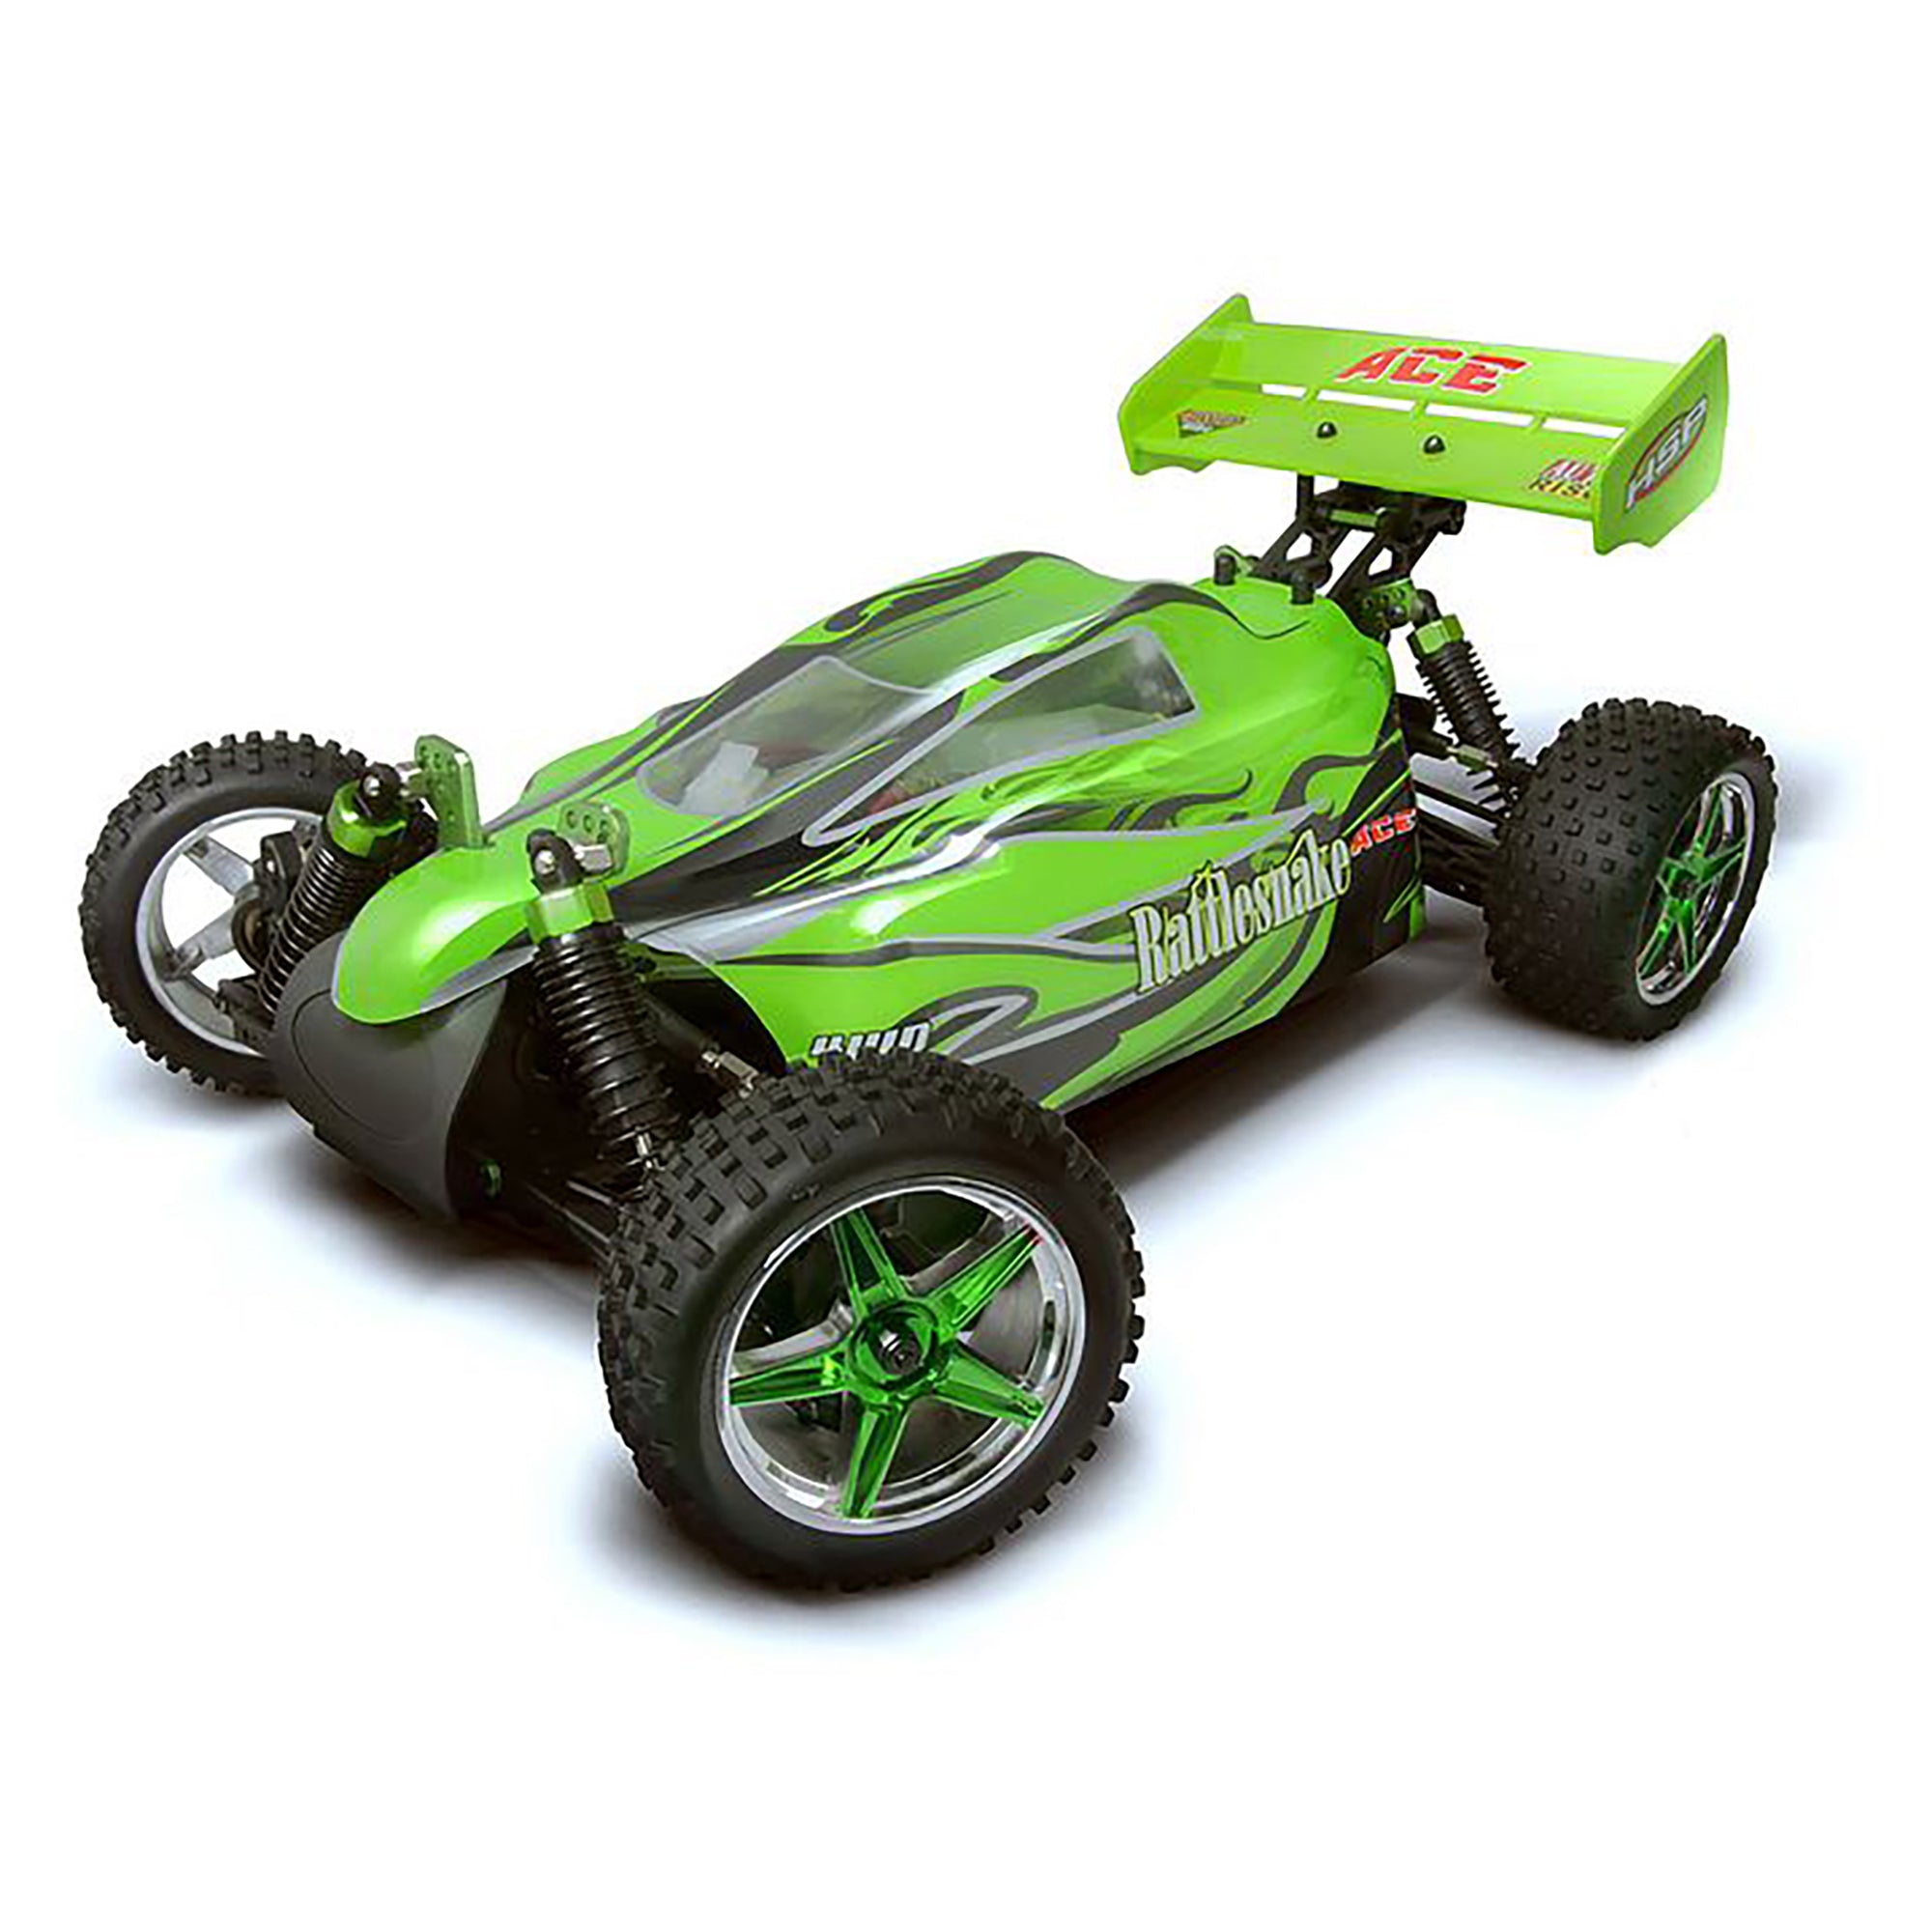 HSP Racing ACE Rattlesnake 2.4GHz Brushless 4WD Off Road RTR 1/10 Scale PRO RC Buggy